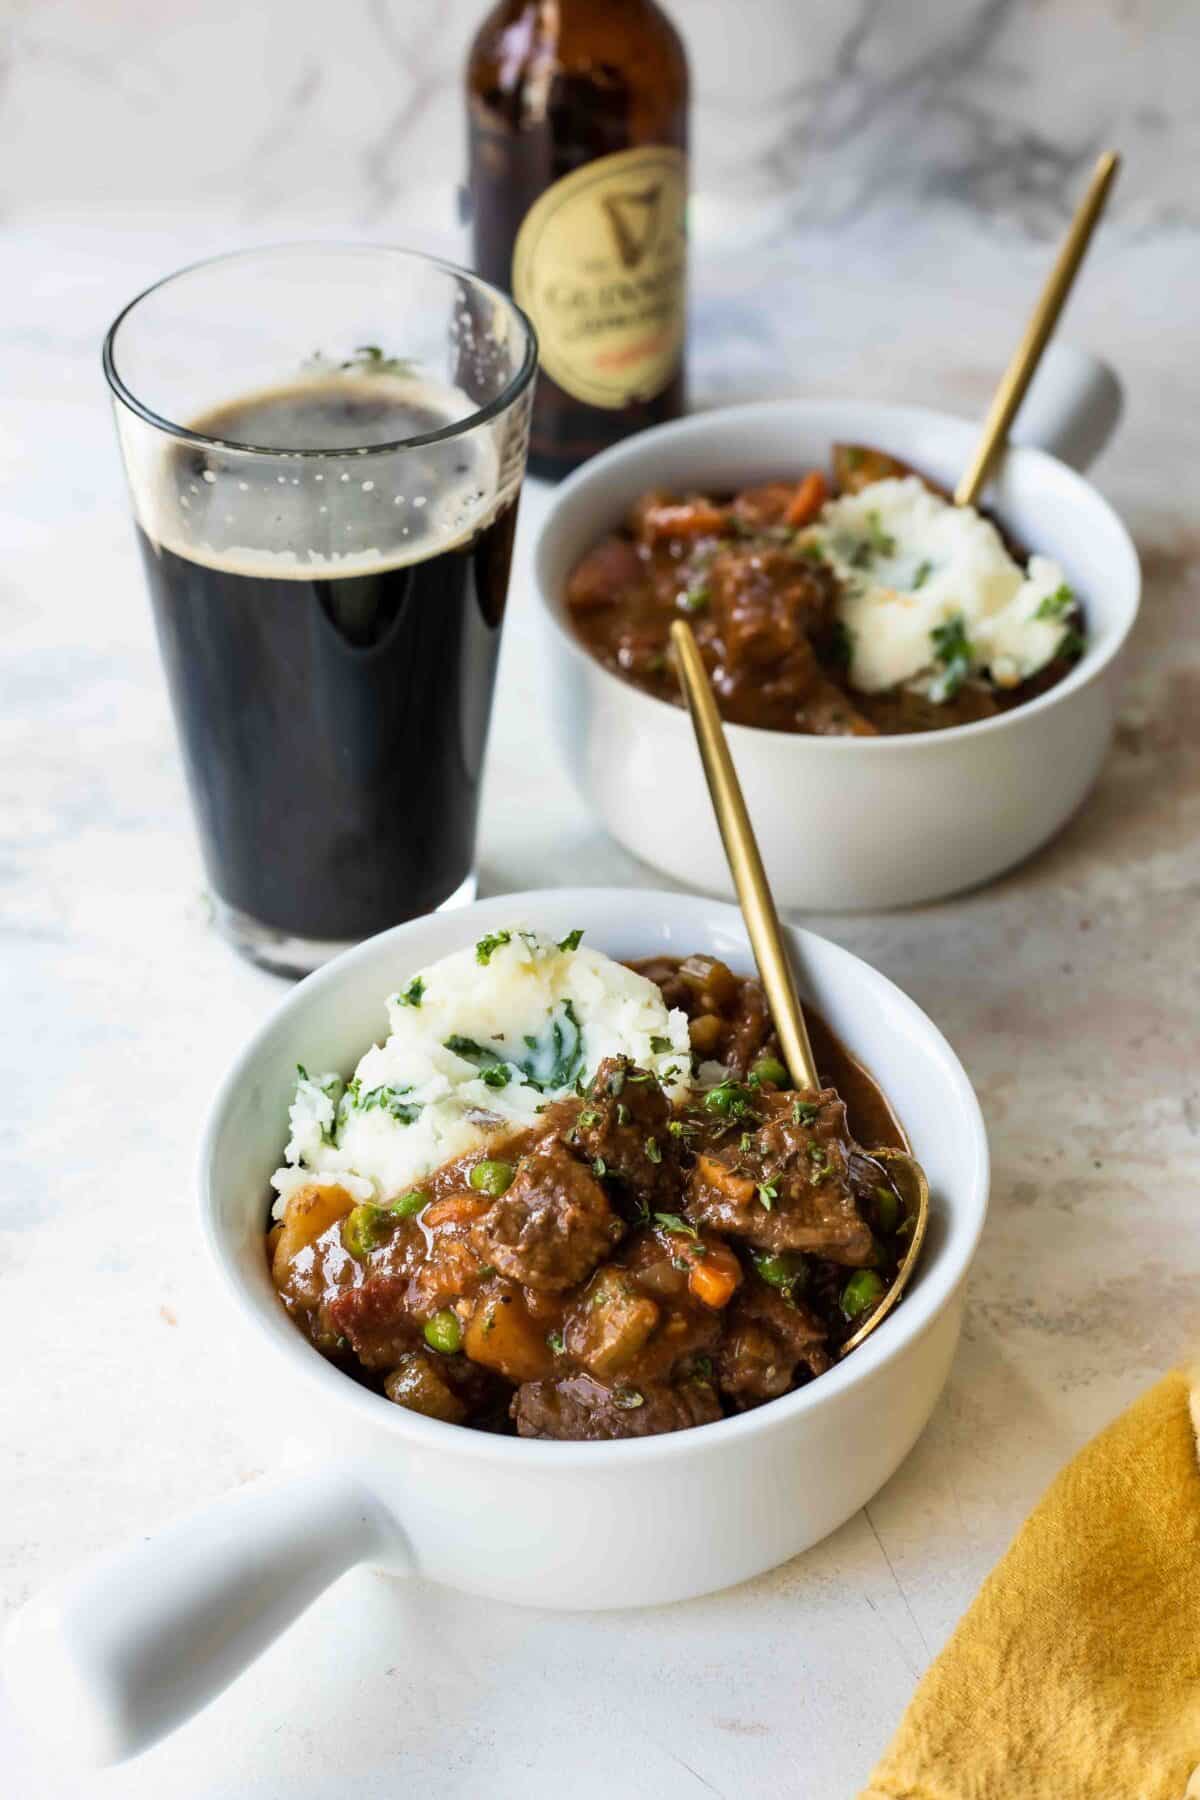 Bowls of Guinness Stew with Colcannon.